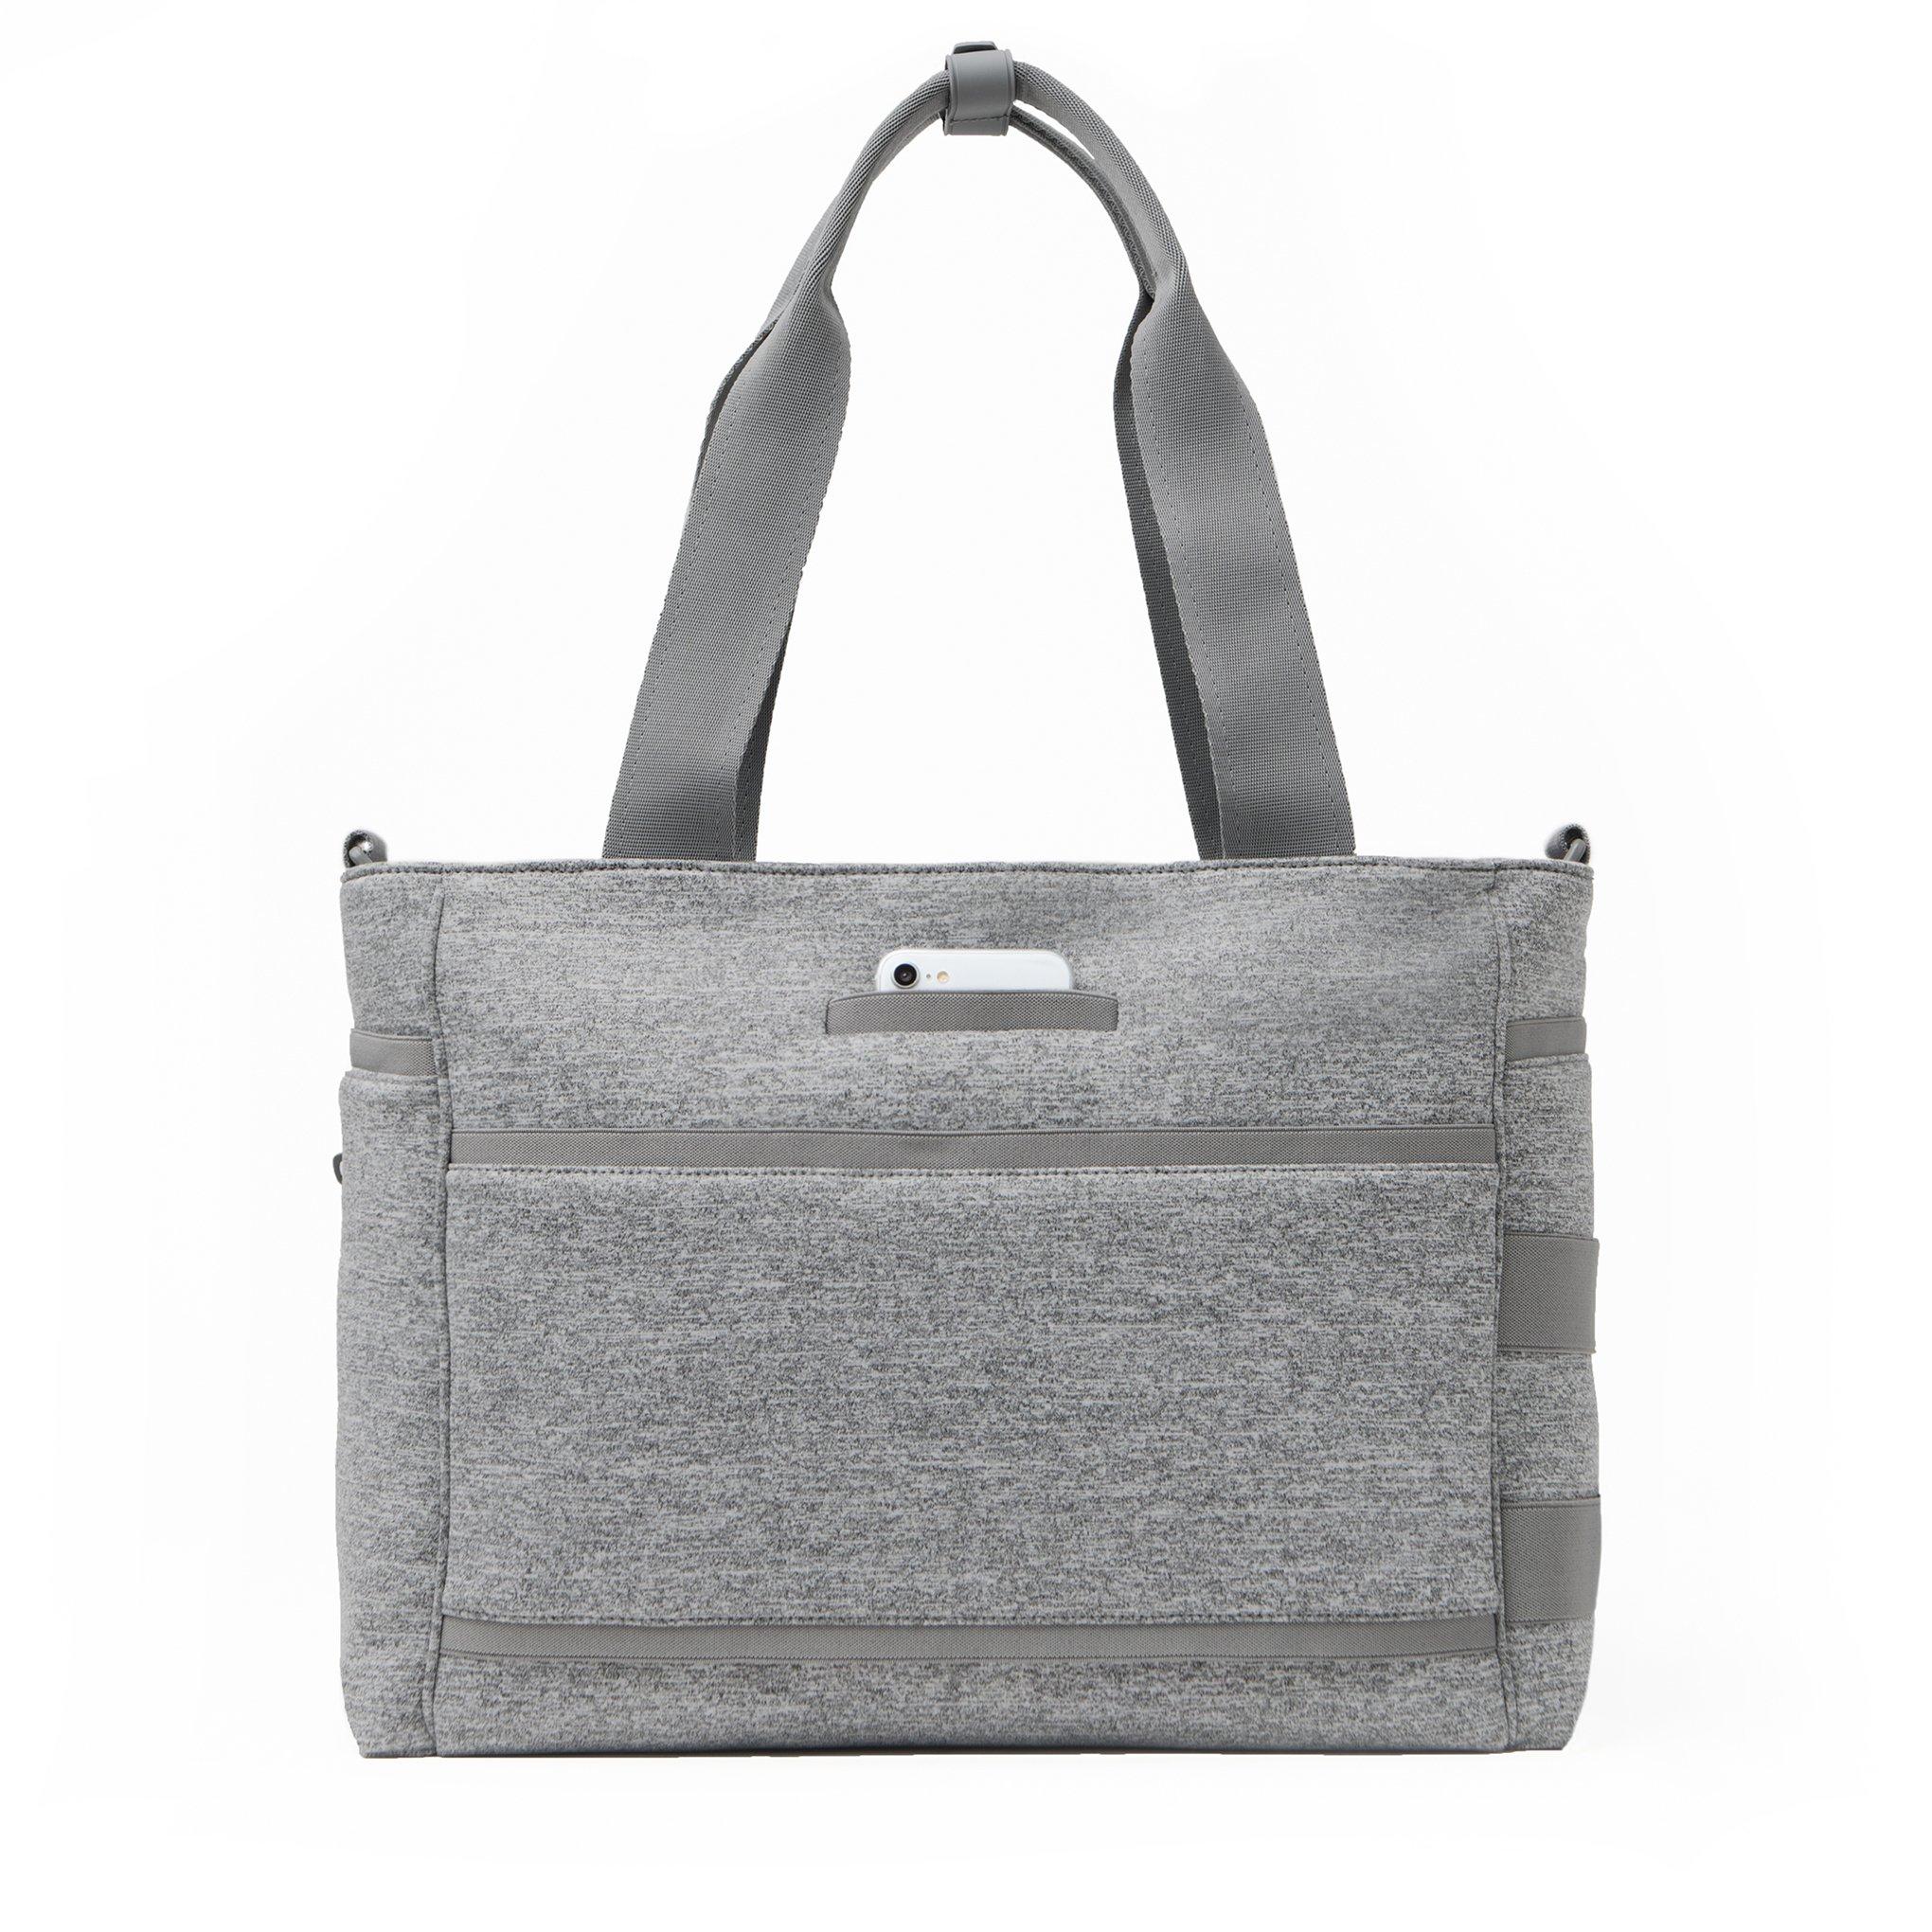 Dagne Dover Wade Diaper Tote In Heather Grey, Large in Gray - Lyst